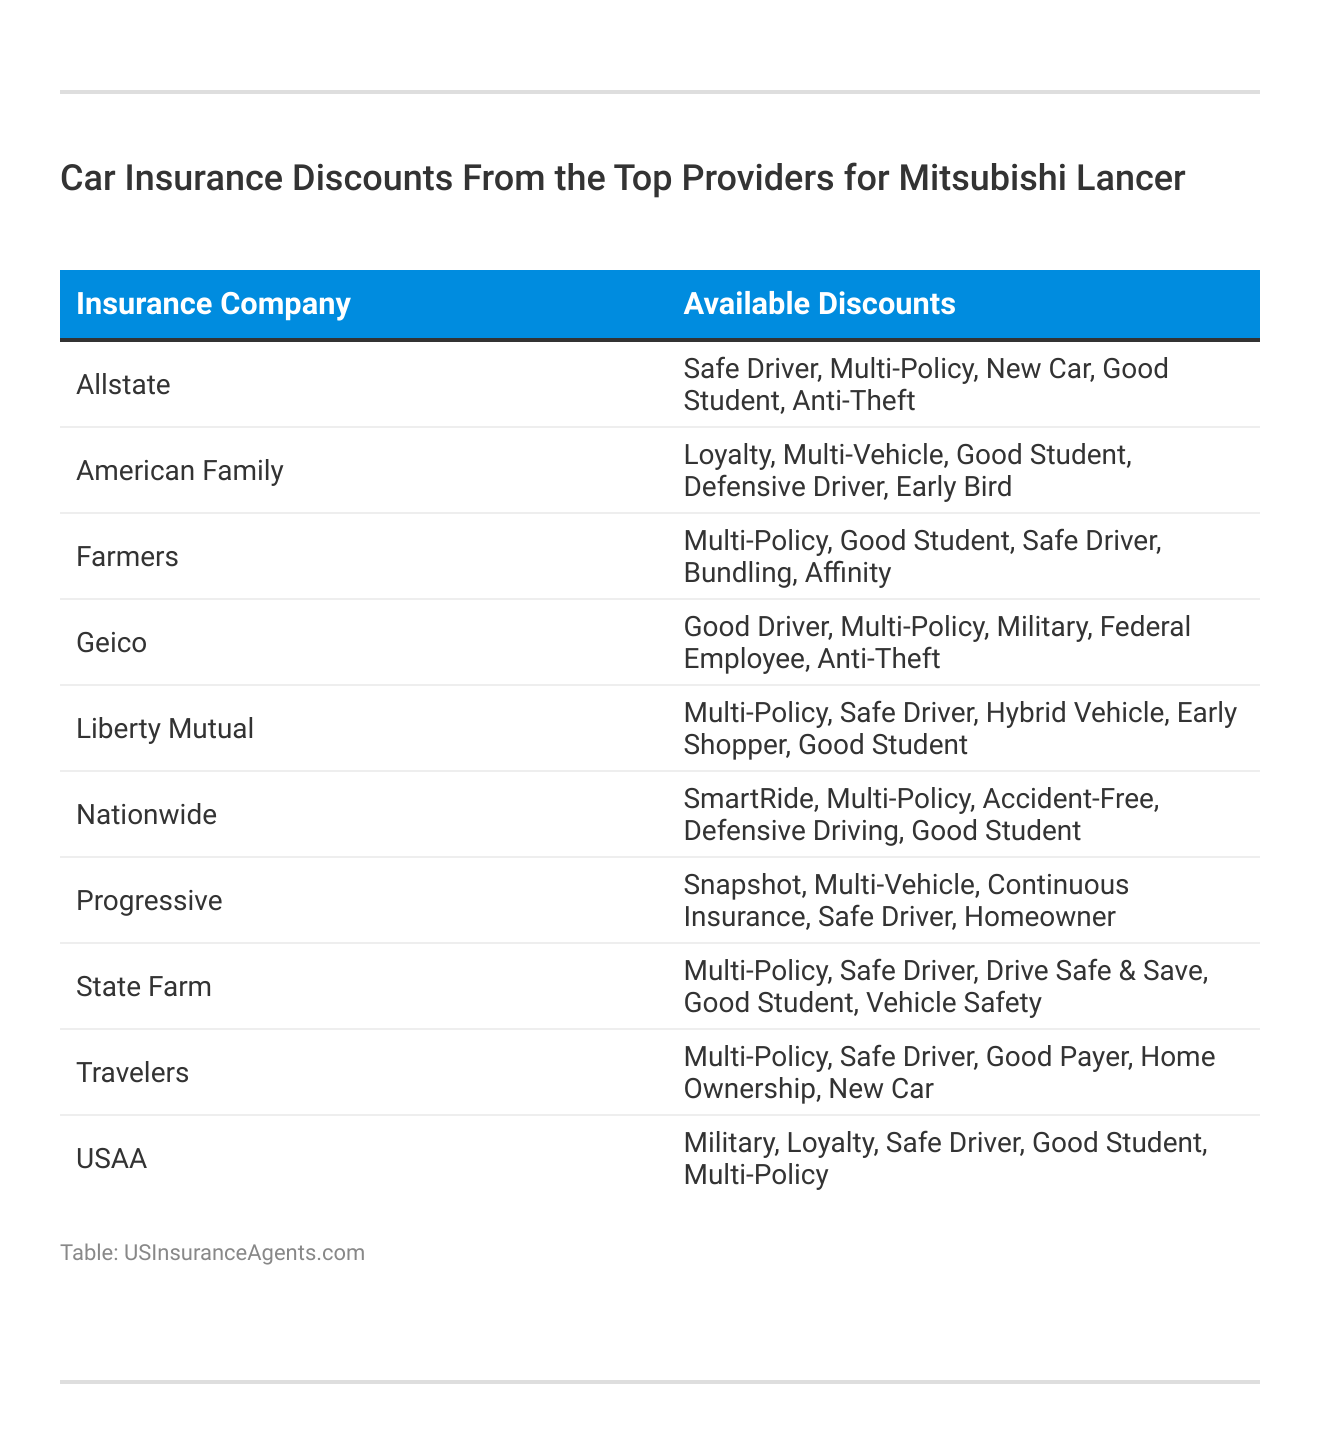 <h3>Car Insurance Discounts From the Top Providers for Mitsubishi Lancer</h3>